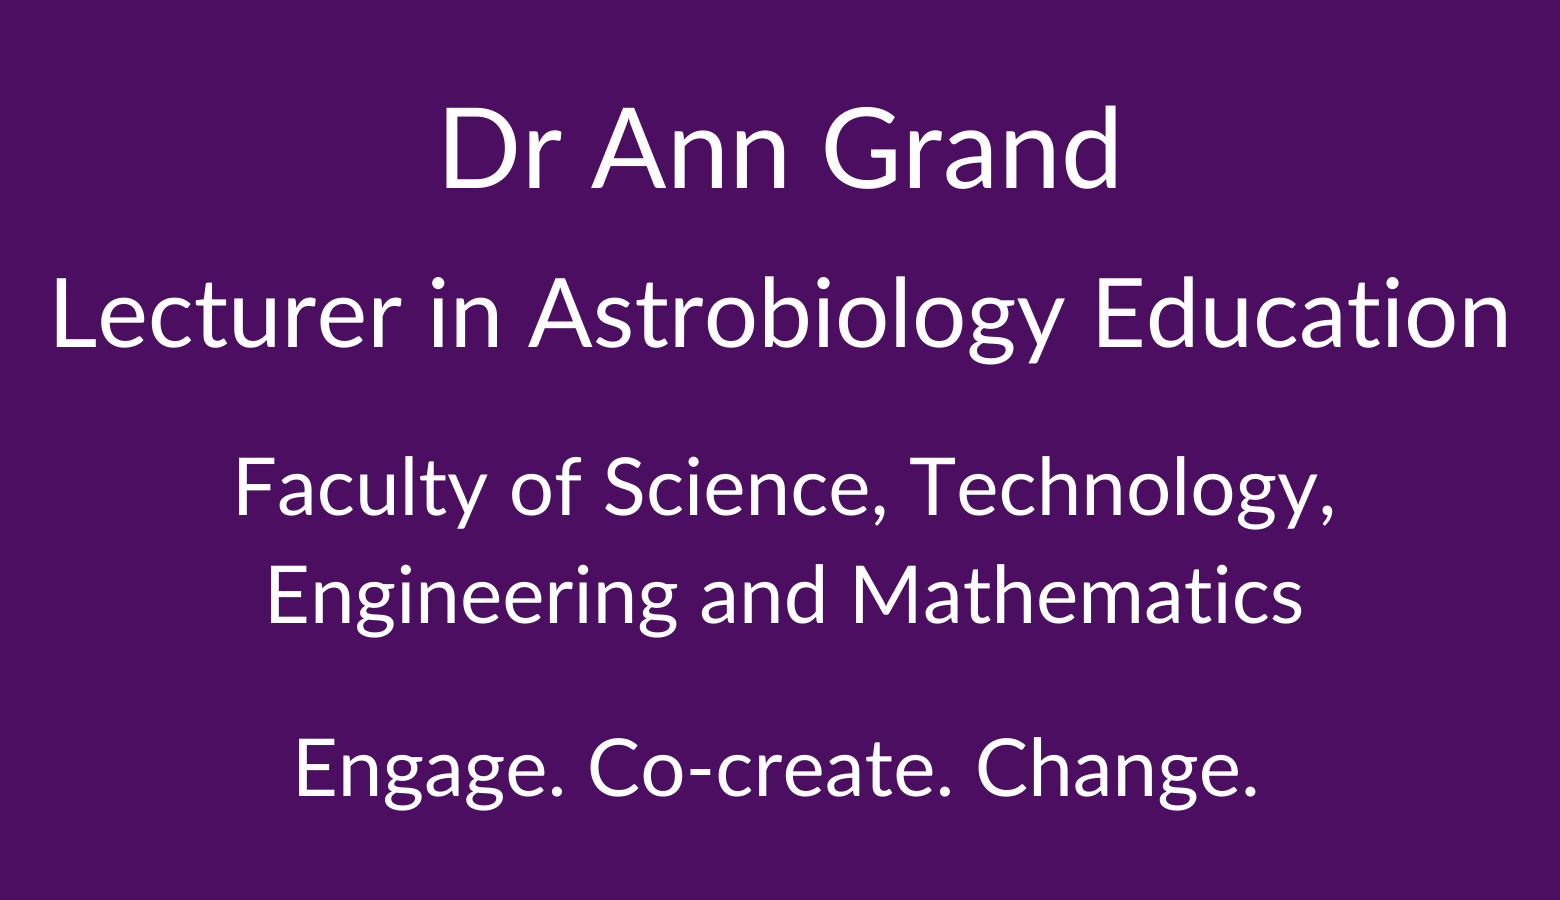 Dr Ann Grand. Lecturer in Astrobiology Education. Faculty of Science. Technology, Engineering and Mathematics. Engage. Co-create. Change.